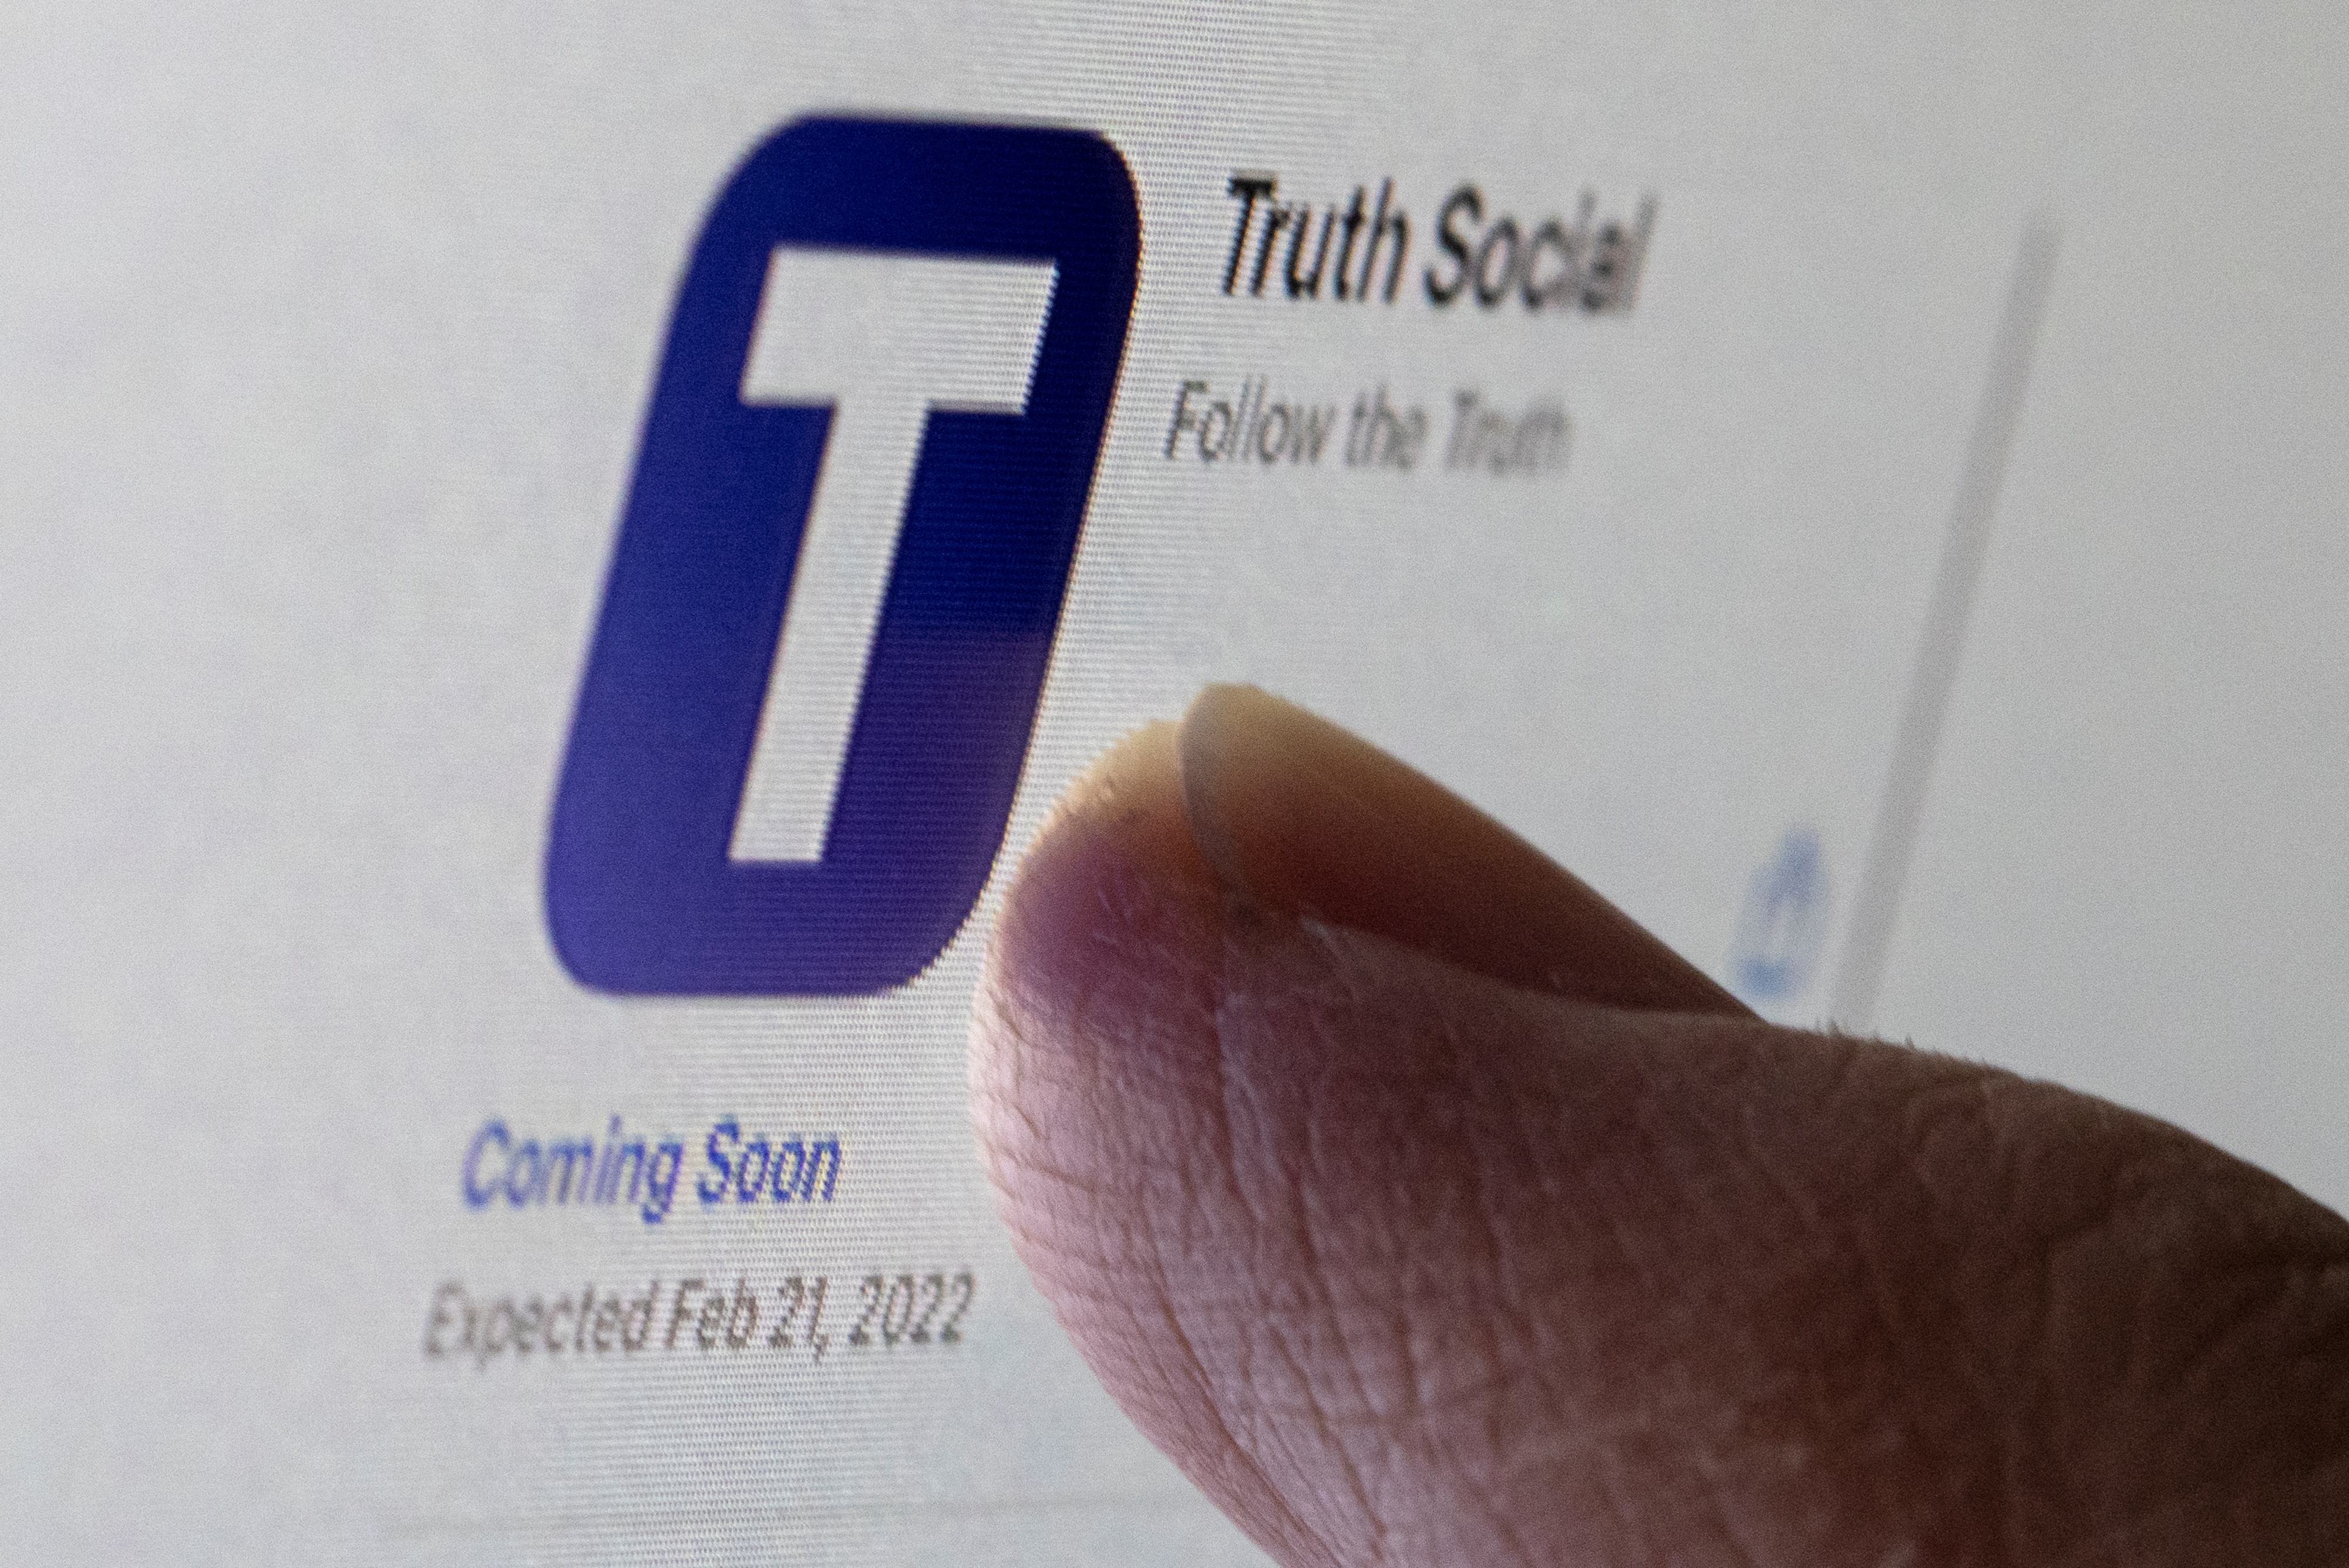 Illustration shows Truth social network app icon in IOS app store